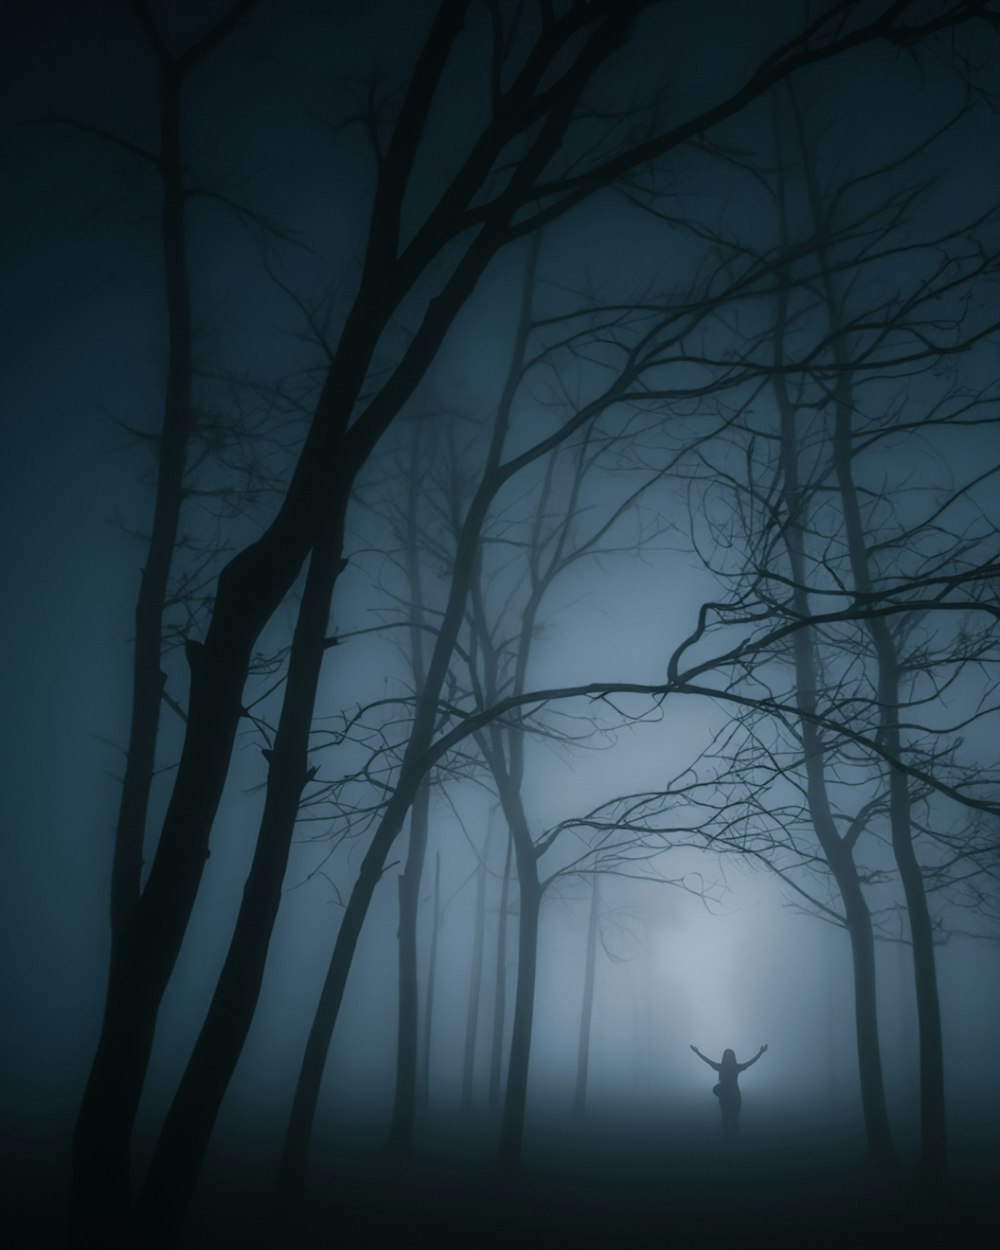 a person standing in the middle of a forest at night